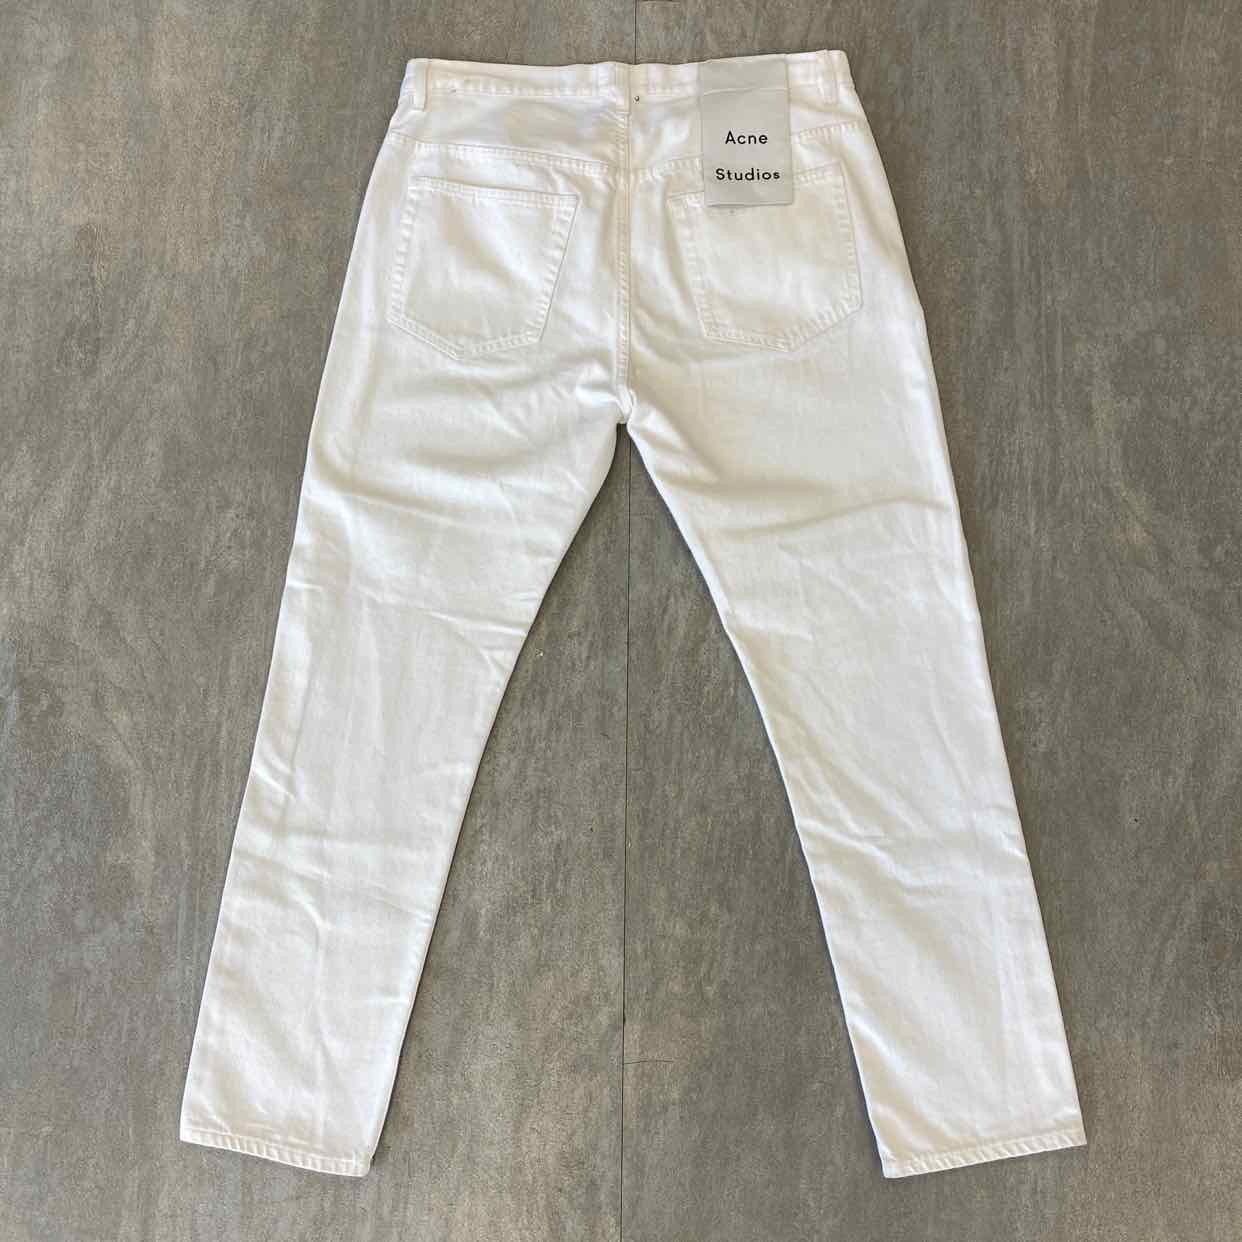 Acne Studios Pants &quot;RELAXED&quot; White Used Size 36